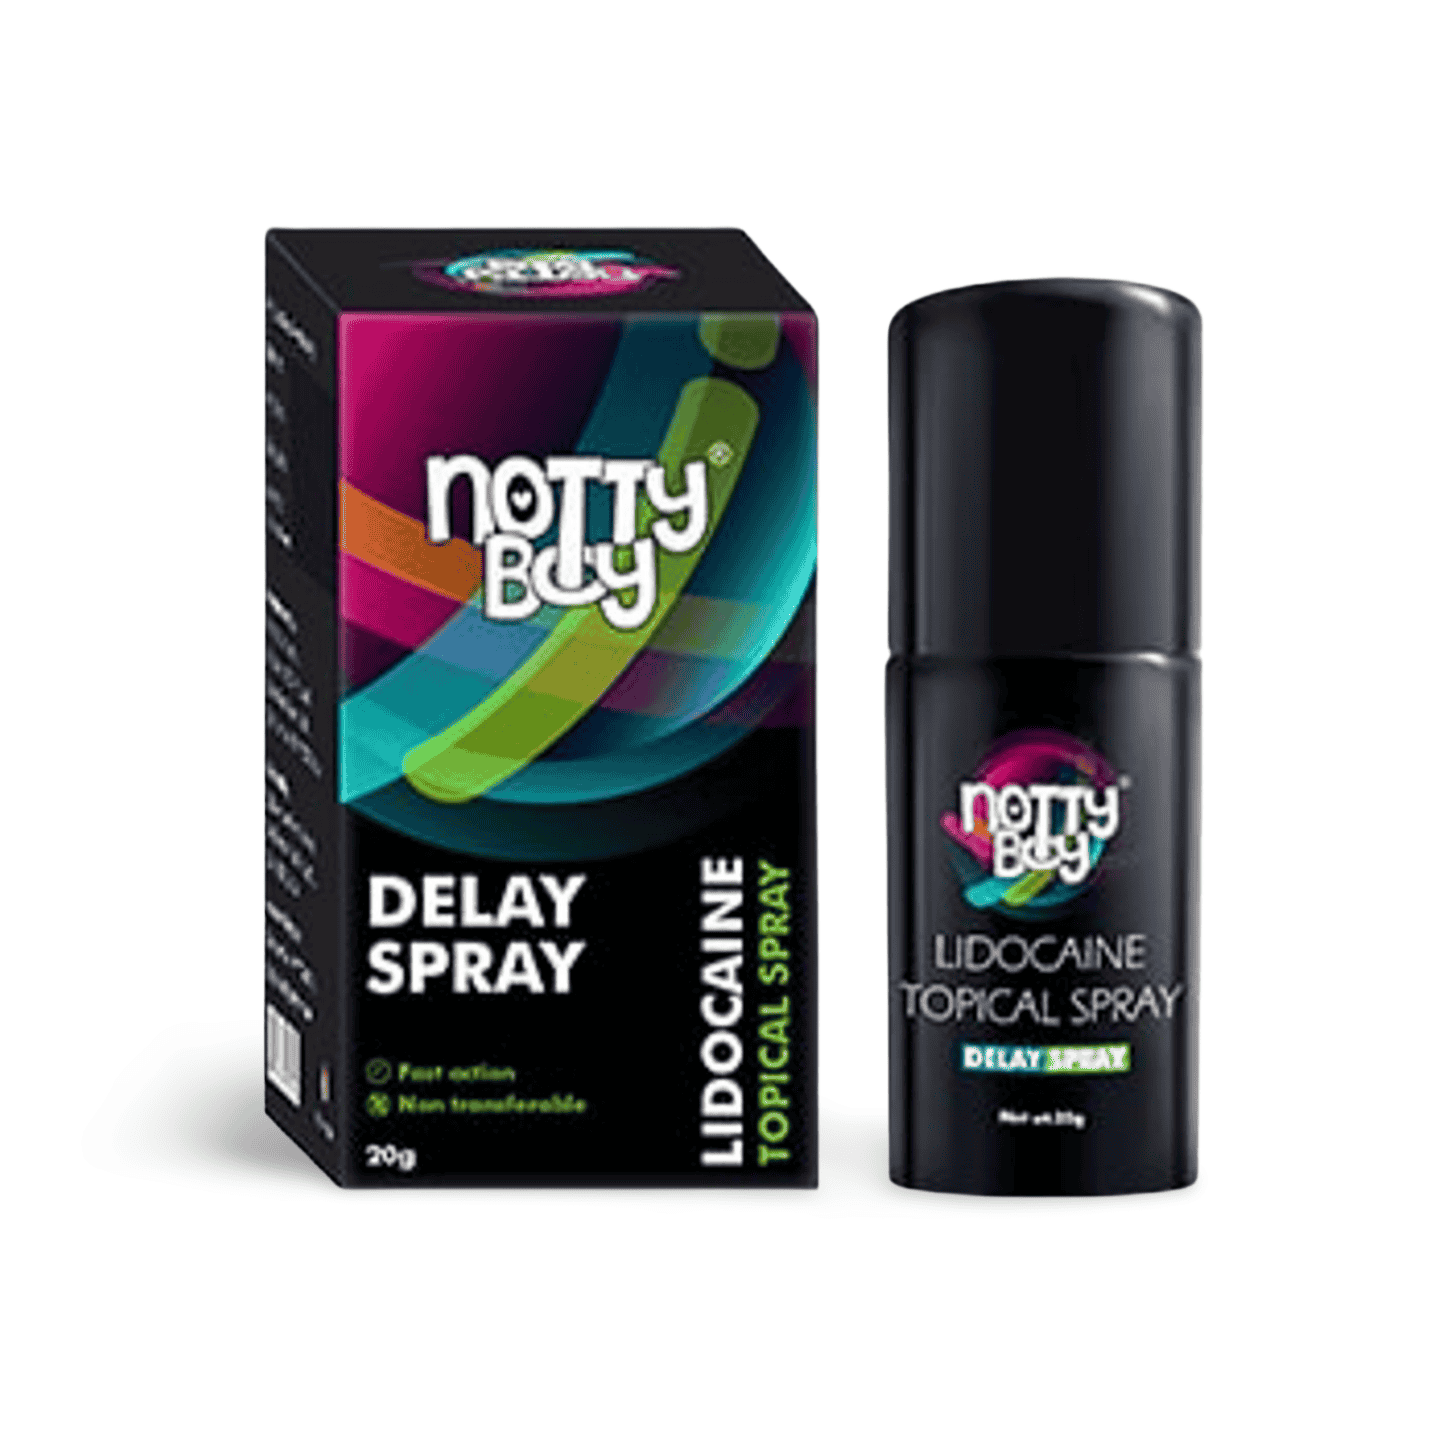 NottyBoy Lidocaine Topical Delay Spray - Shop Online